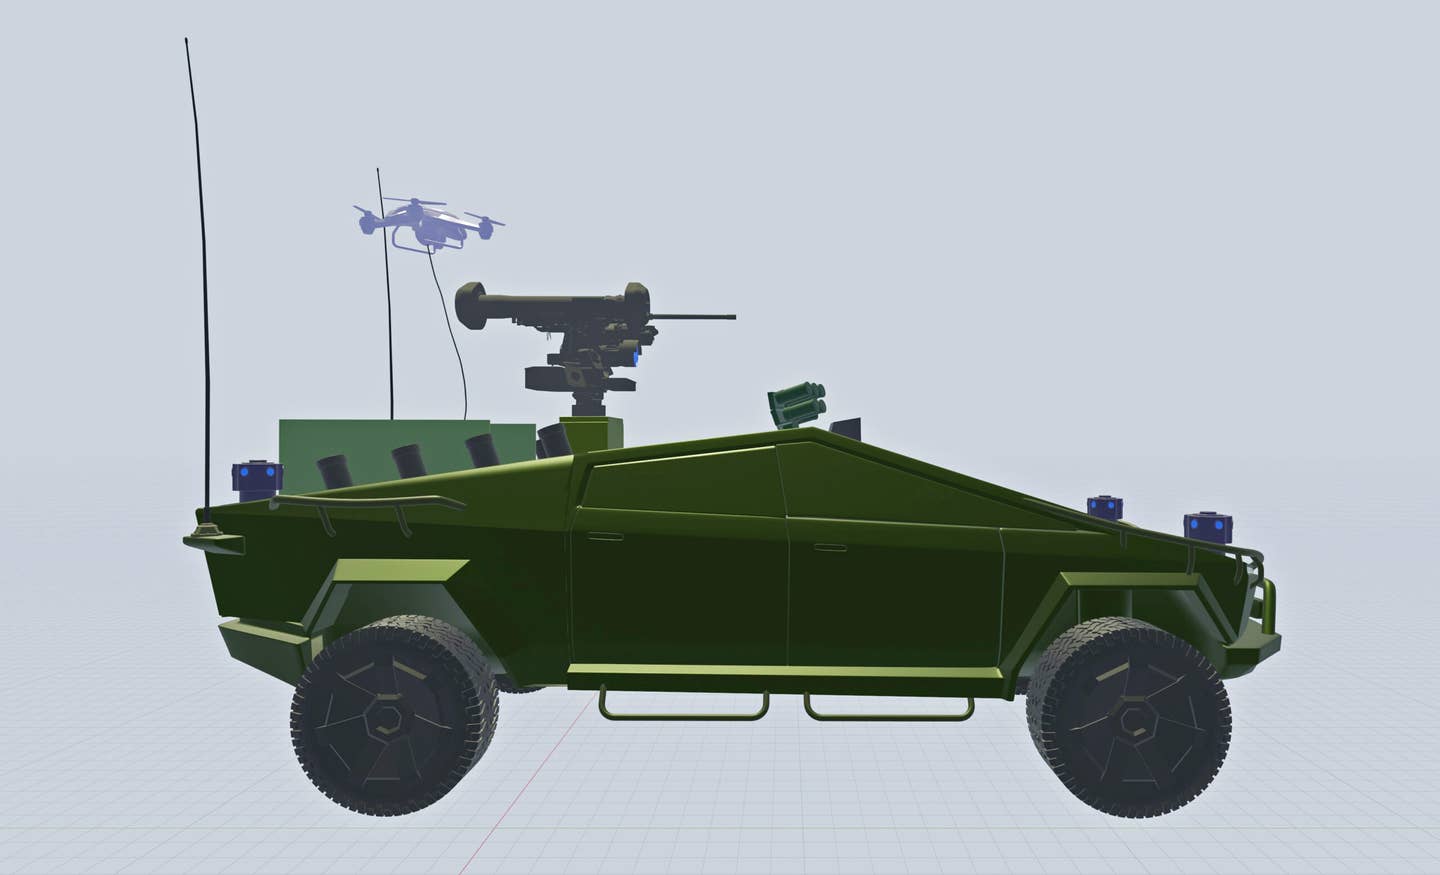 A conceptual rendering of a Cybertruck UGV that is a collaboration between TWZ and Mr Vu The Vuong. It features CROWS remote weapons and sensor station with a machine gun and Javelin anti-tank missiles, eight launch tubes for loitering munitions, a tethered overwatch drone, smoke/countermeasure launchers, enhanced suspension, multiple cameras and LIDAR self-driving sensors, and a bullbar with lighting and winch, among other alterations.